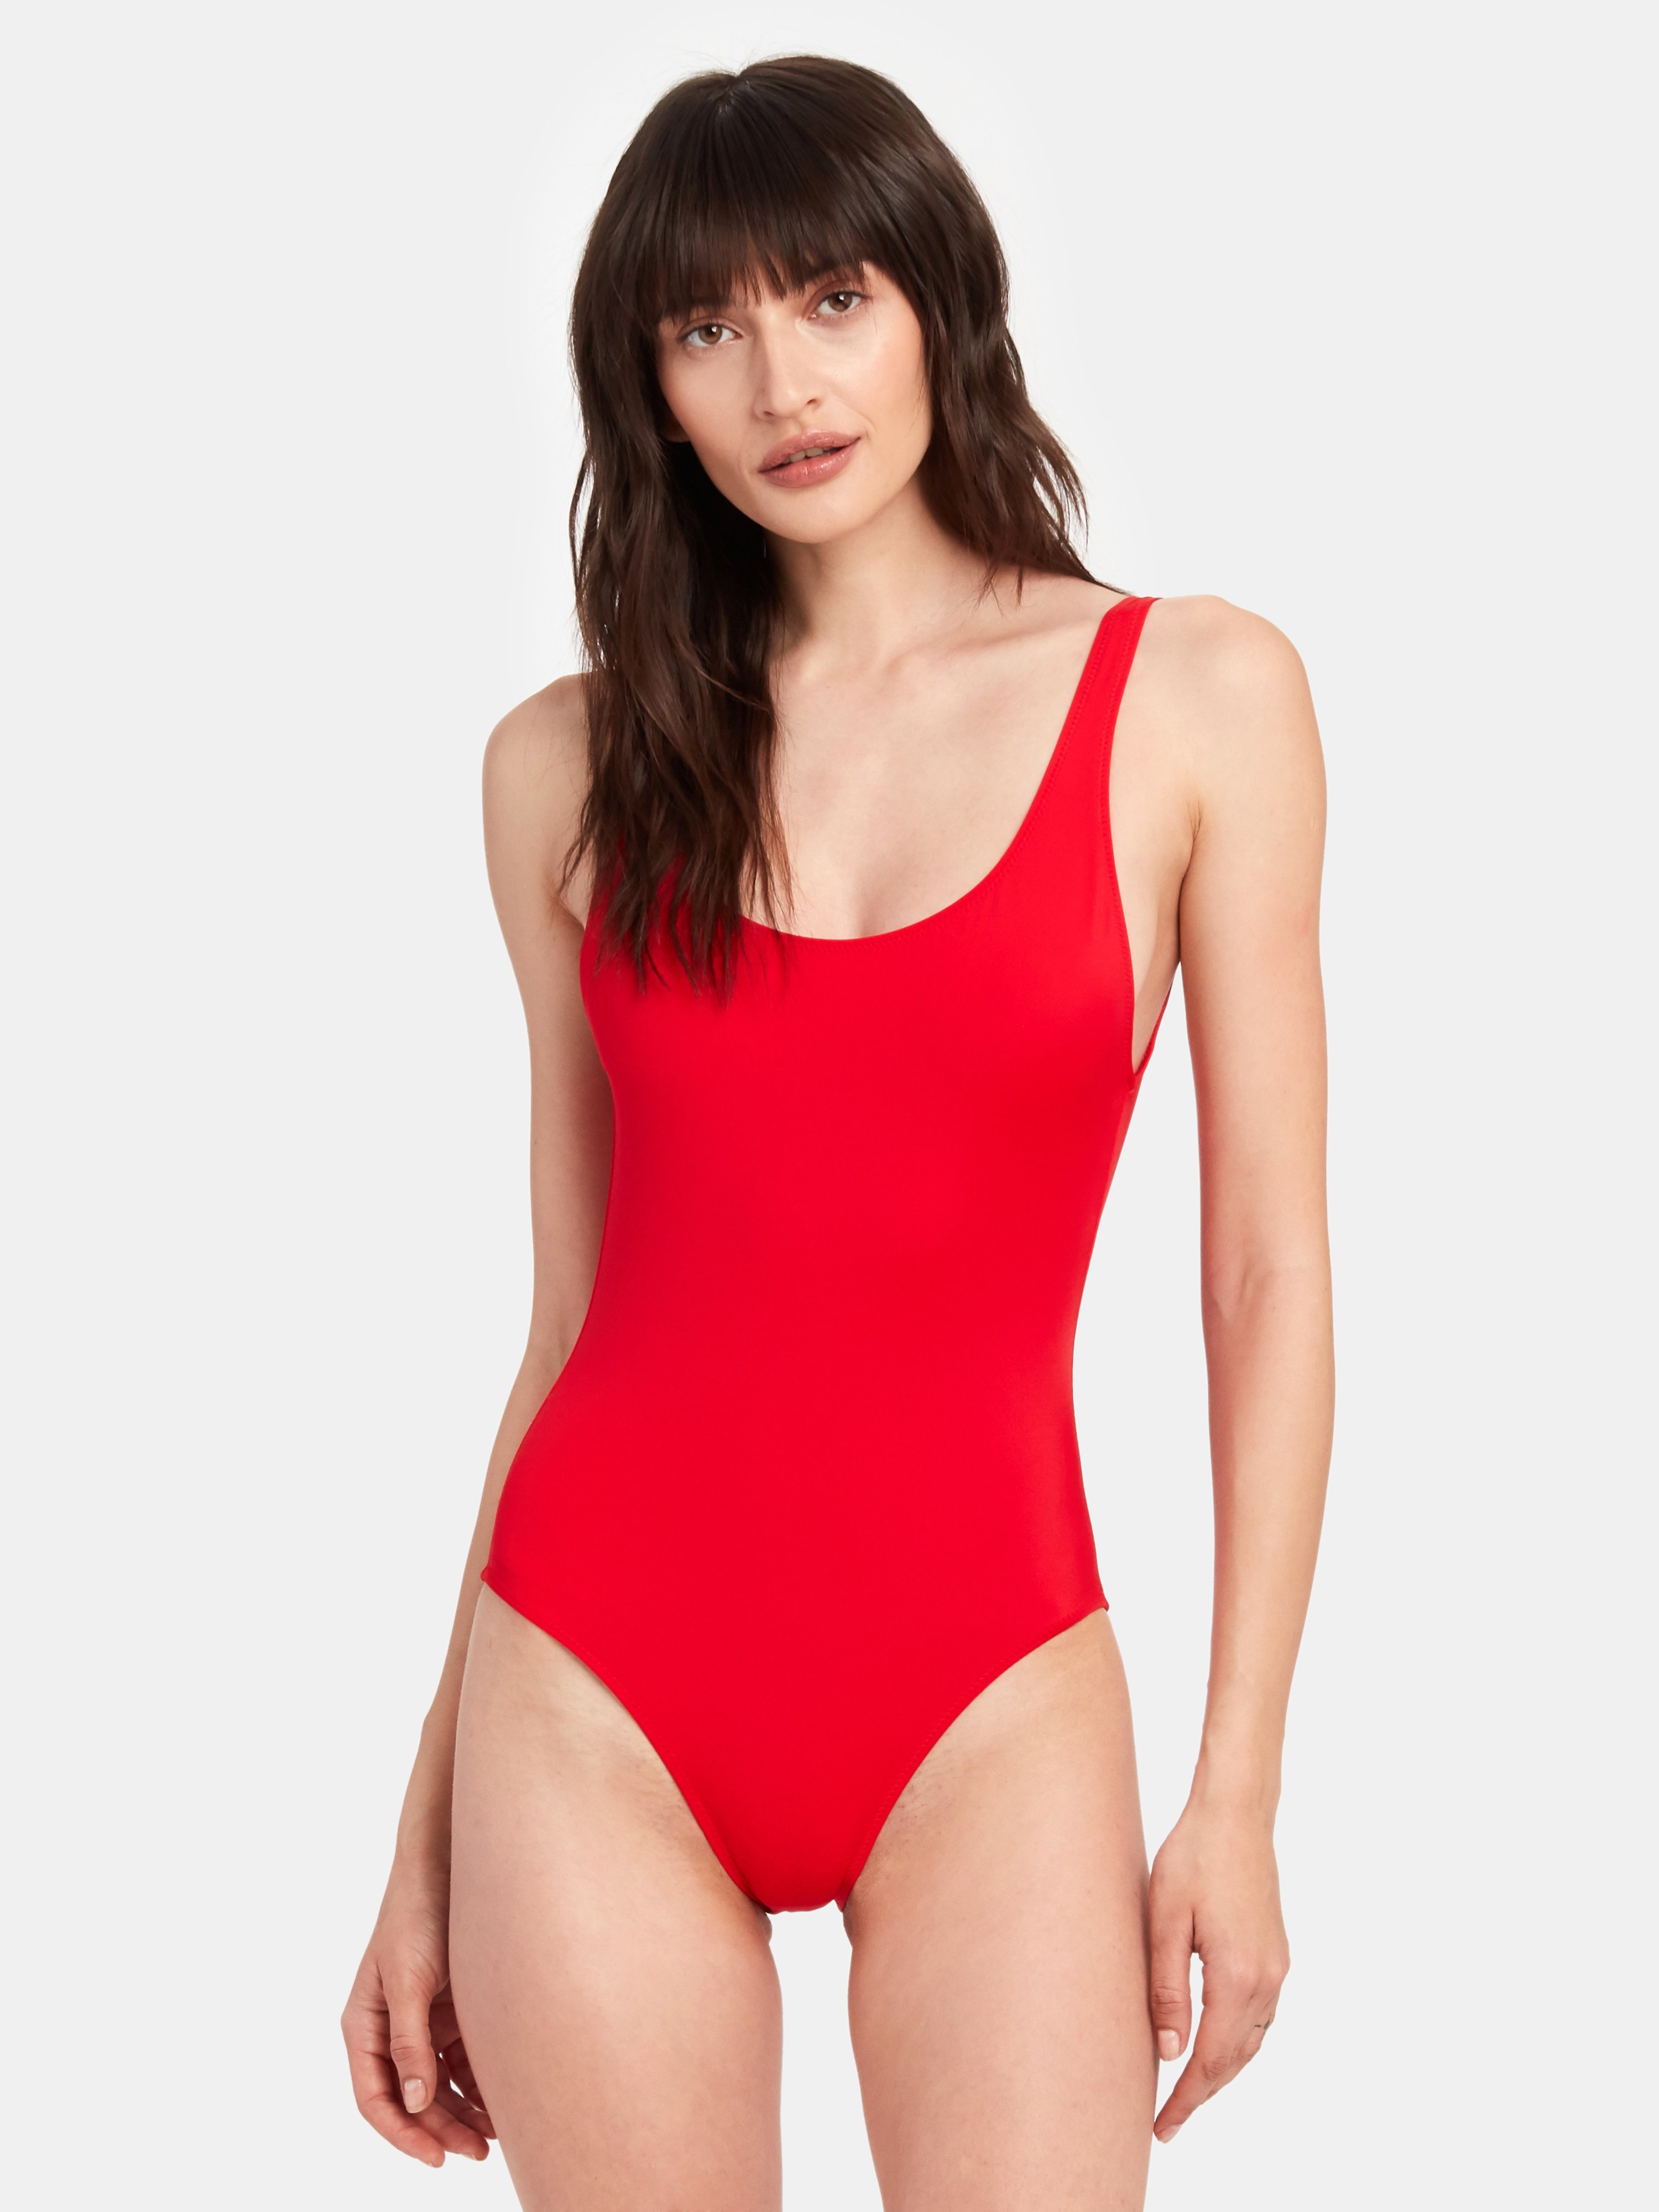 SOLID & STRIPED SOLID & STRIPED THE ANNE MARIE ONE-PIECE SWIMSUIT